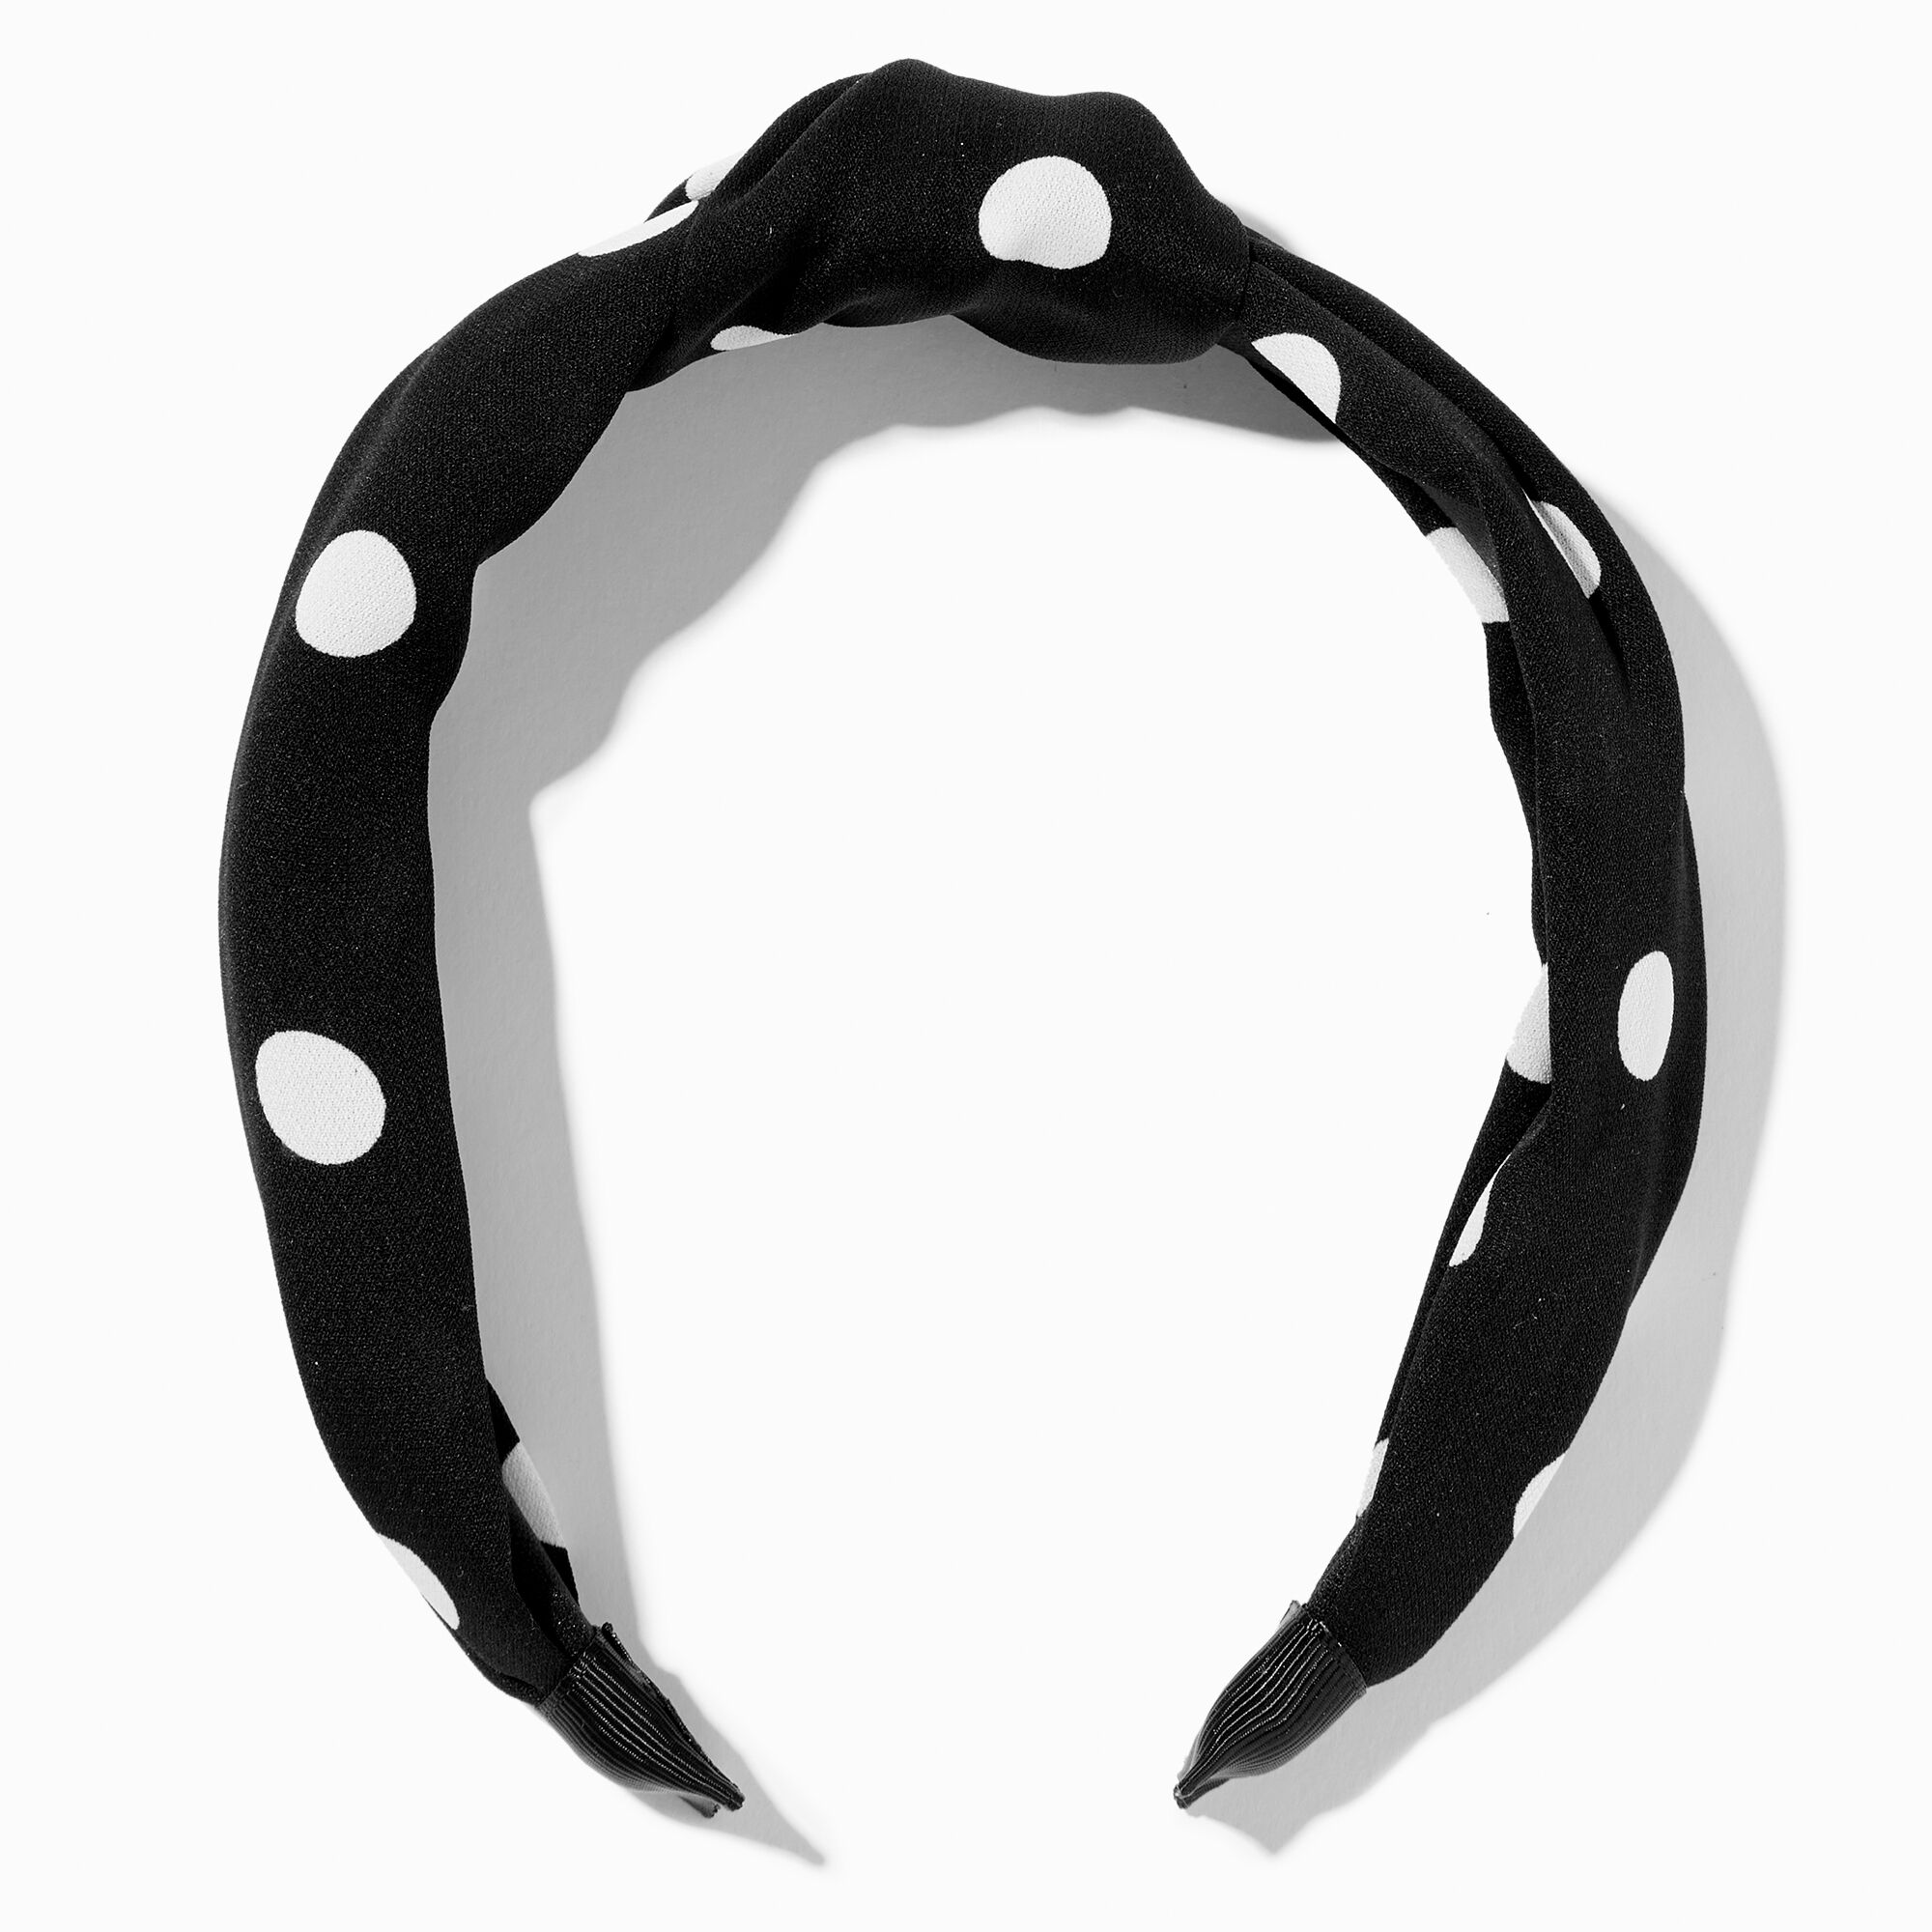 View Claires Black Dot Knotted Headband White information